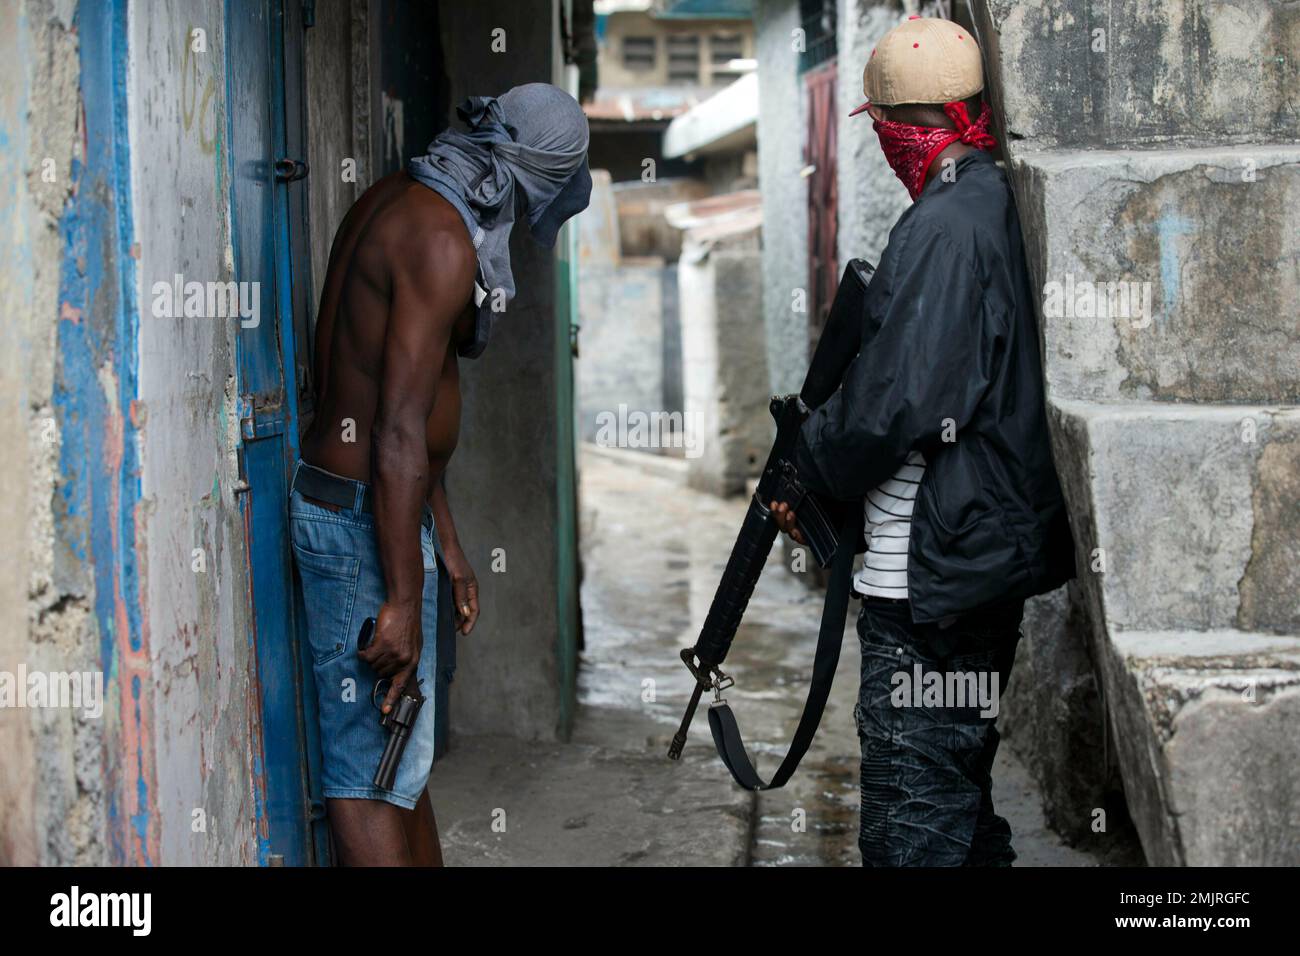 In this May 31, 2019, photo, gang members stand guard and hold guns six months after a massacre in the La Saline slum of Port-au-Prince, Haiti. “Gangs are multiplying because the government is weak,” said Paul Eronce Villard, Haiti’s general prosecutor, who estimates there are more than 50 gangs now operating in the country. “It’s a real challenge for police.” (AP Photo/Dieu Nalio Chery) Stock Photo